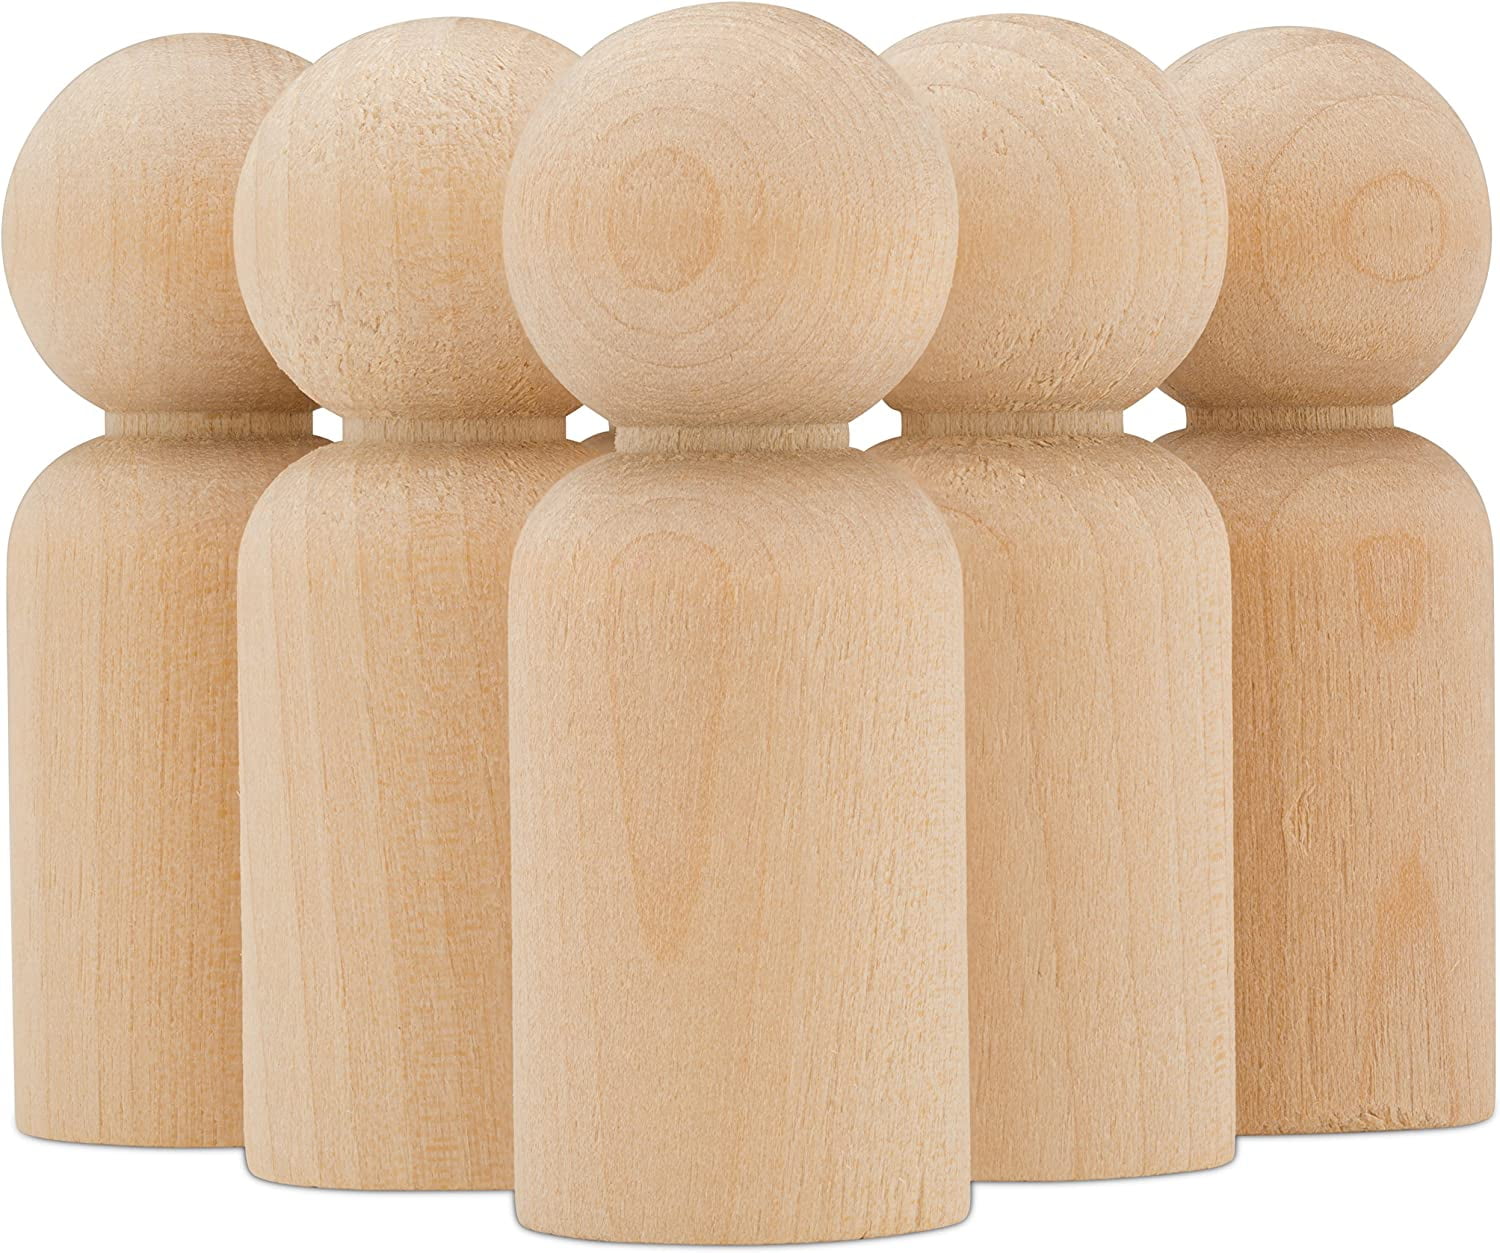 Large Wood Peg Dolls 5-1/2 inch, Mom/Angel Shape Peg People, Pack of 5 Birch Unfinished Wooden Dolls to Paint, by Woodpeckers